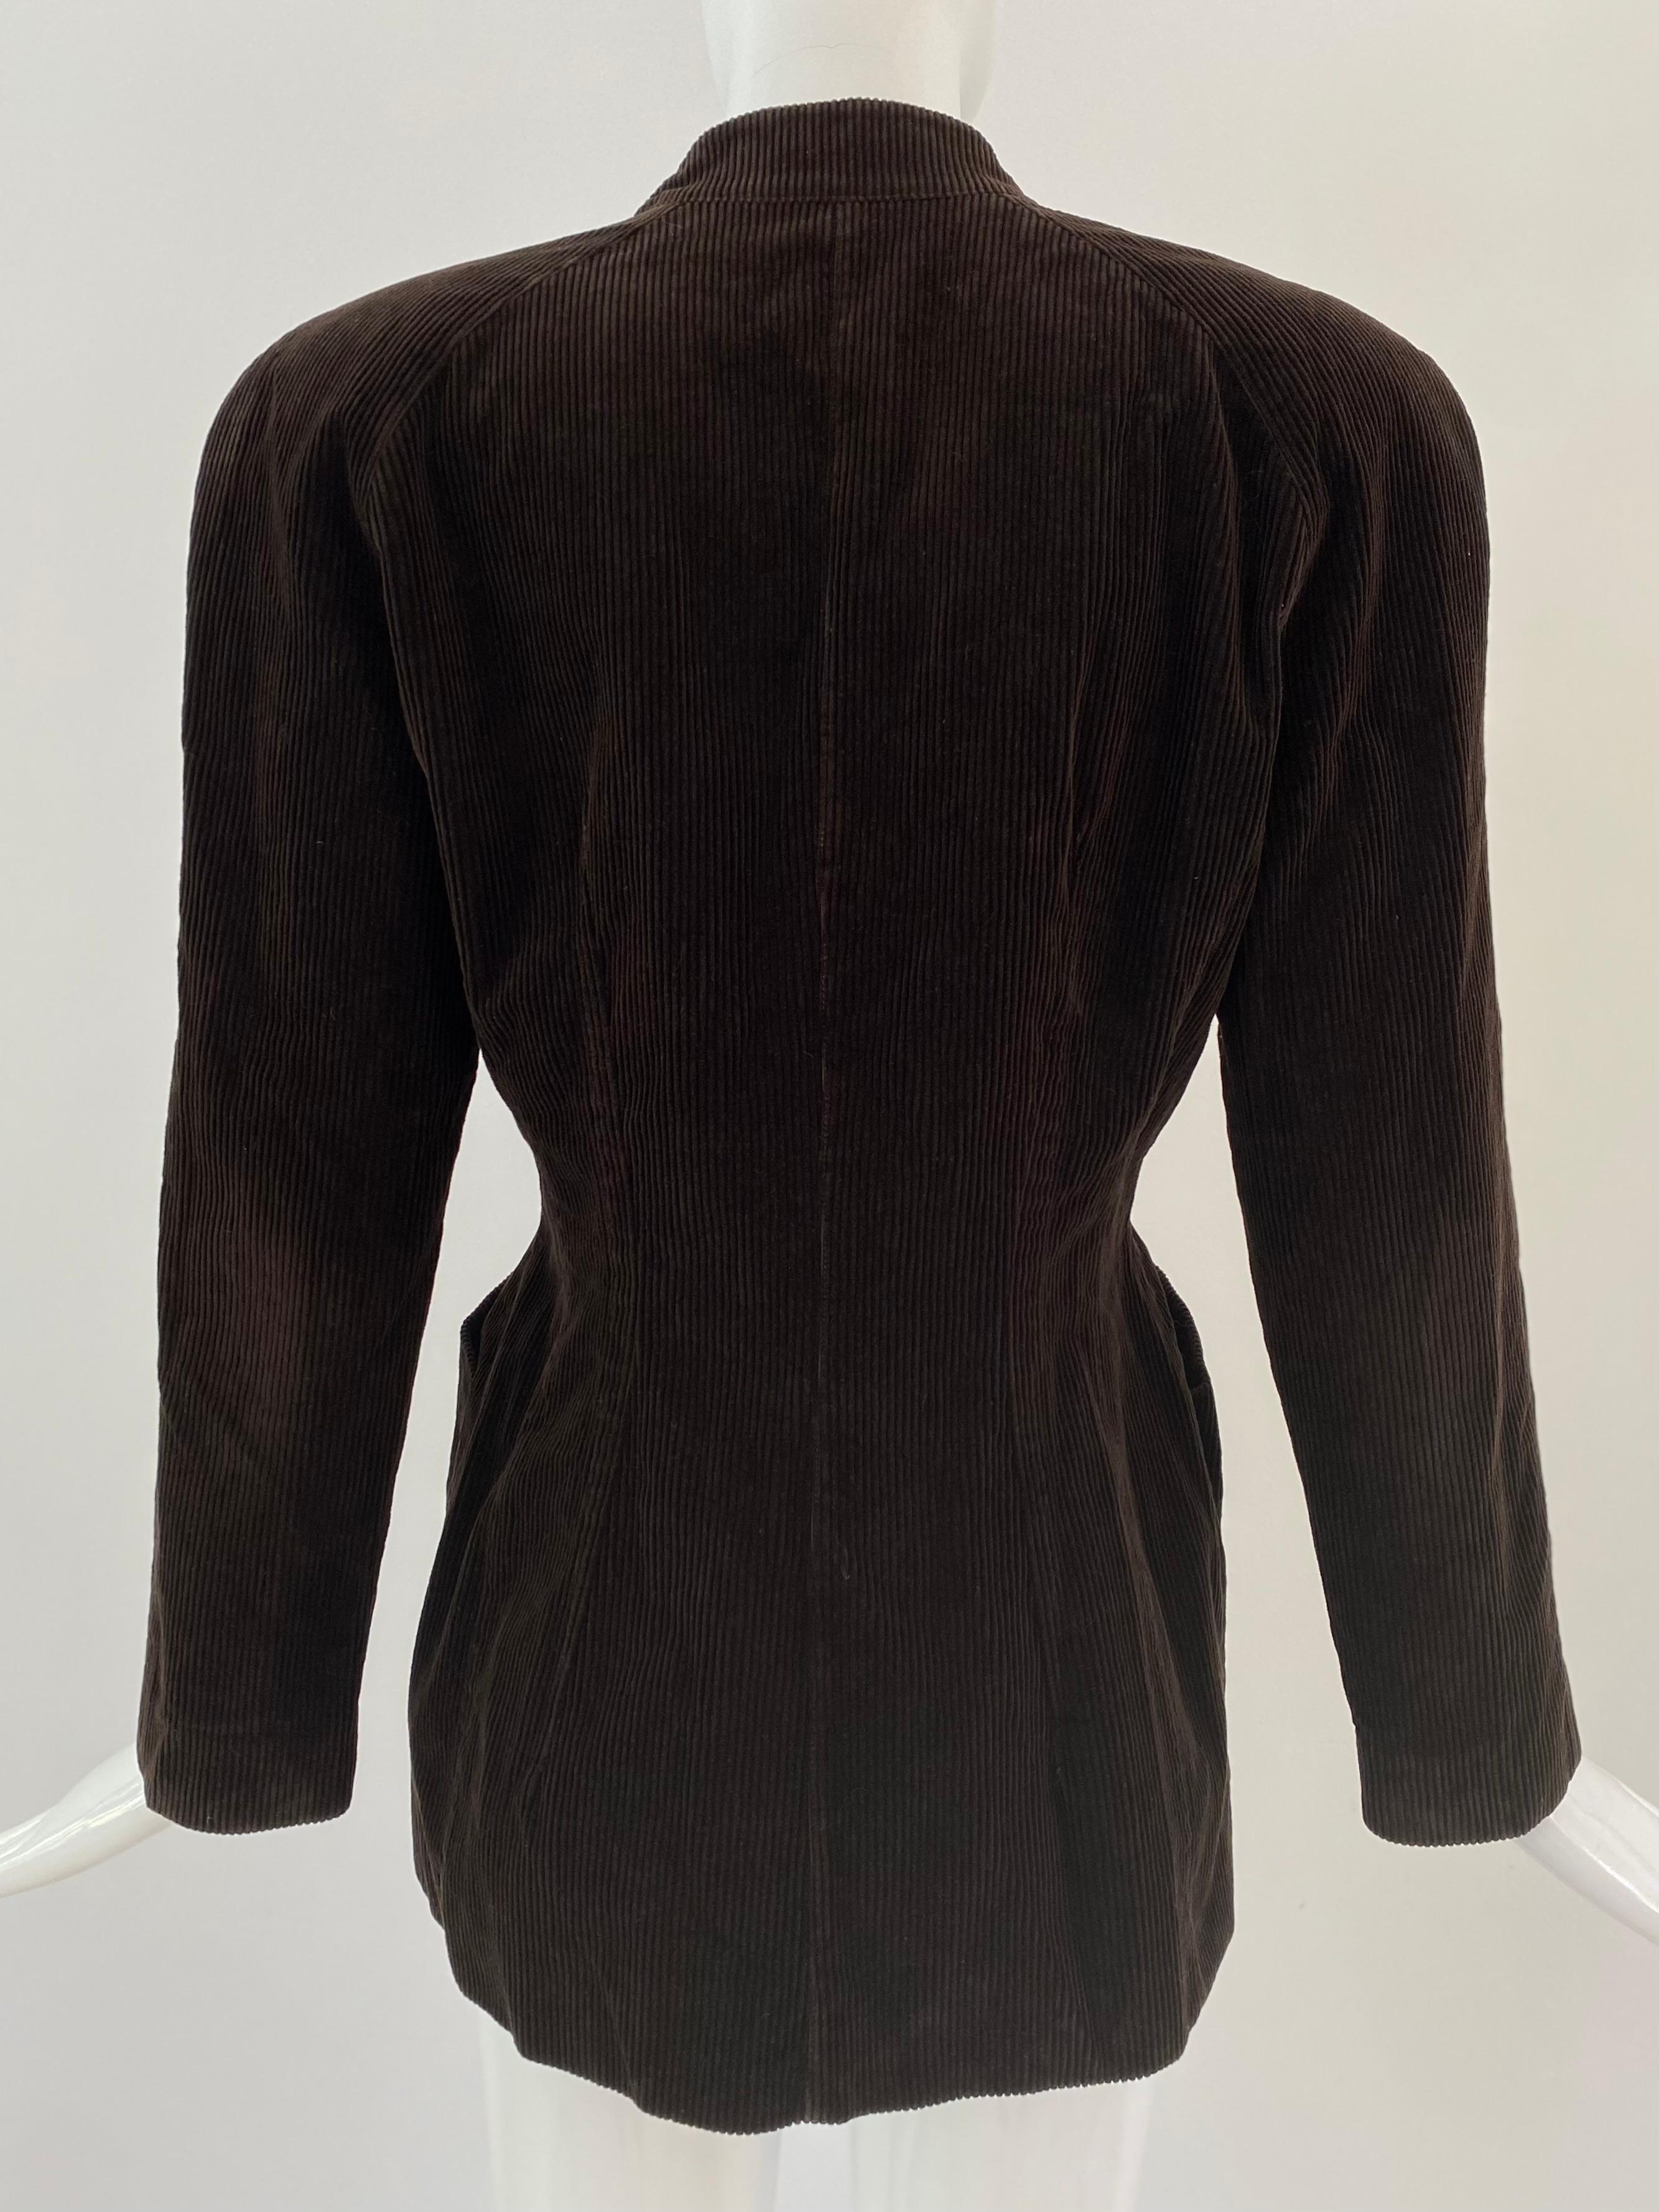 Introducing a timeless fashion piece from the 1990s, the Thierry Mugler jacket in an hourglass shape. Crafted from a luxurious deep brown corduroy fabric, this jacket can be used as for daytime casual while also exuding a distinct sense of